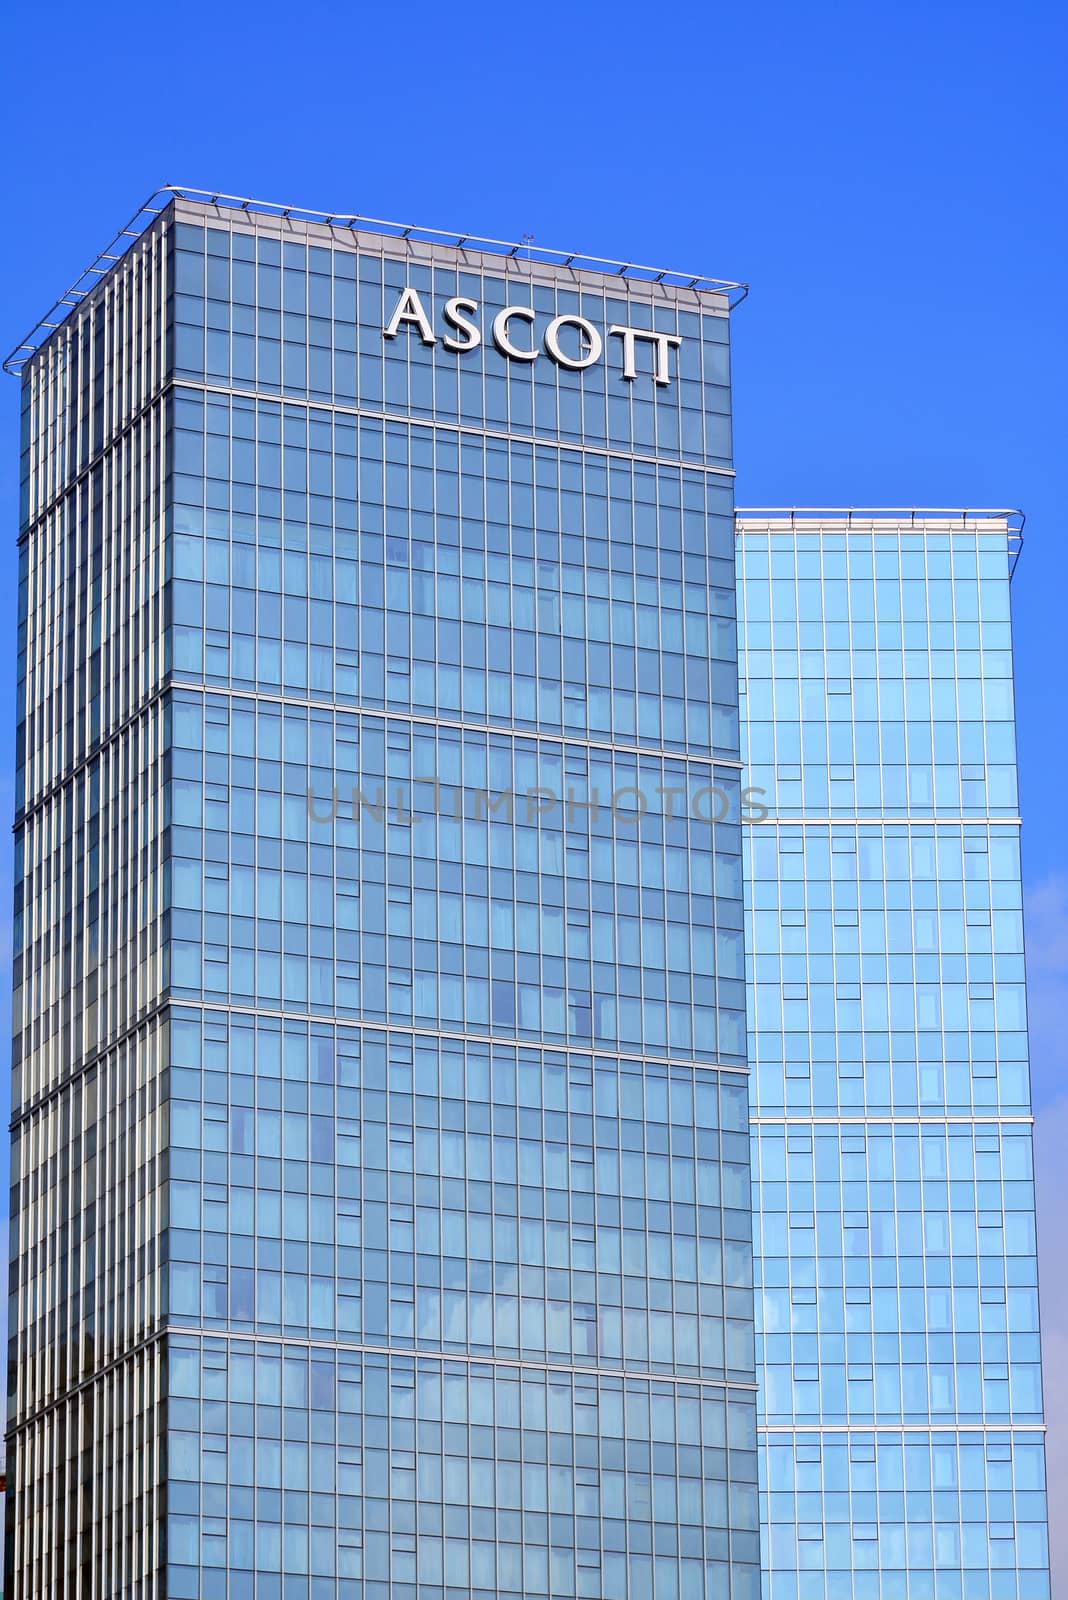 TAGUIG, PH - OCT. 1: Ascott facade on October 1, 2016 in Bonifacio Global City, Taguig, Philippines. The Ascott Limited is the world's largest international serviced residence owner-operator